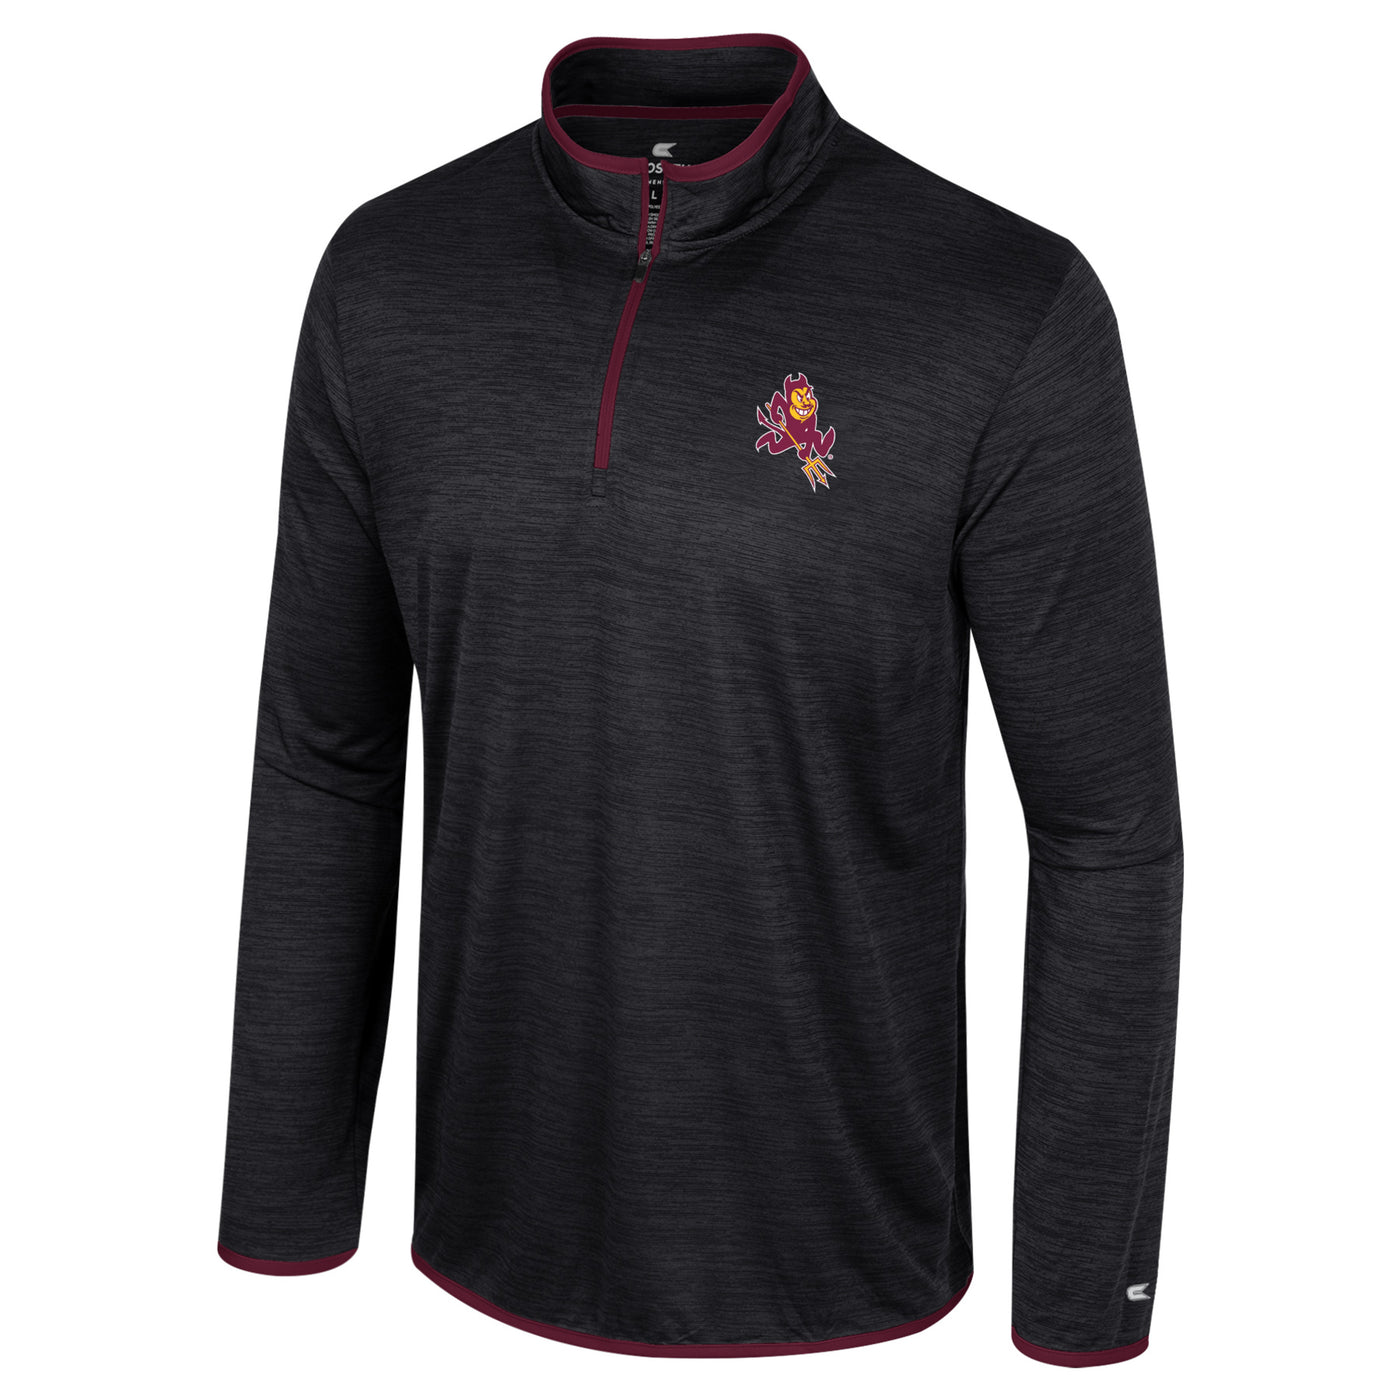 ASU black long sleeve quarter zip lined with maroon trim and a sparky mascot on the chest.